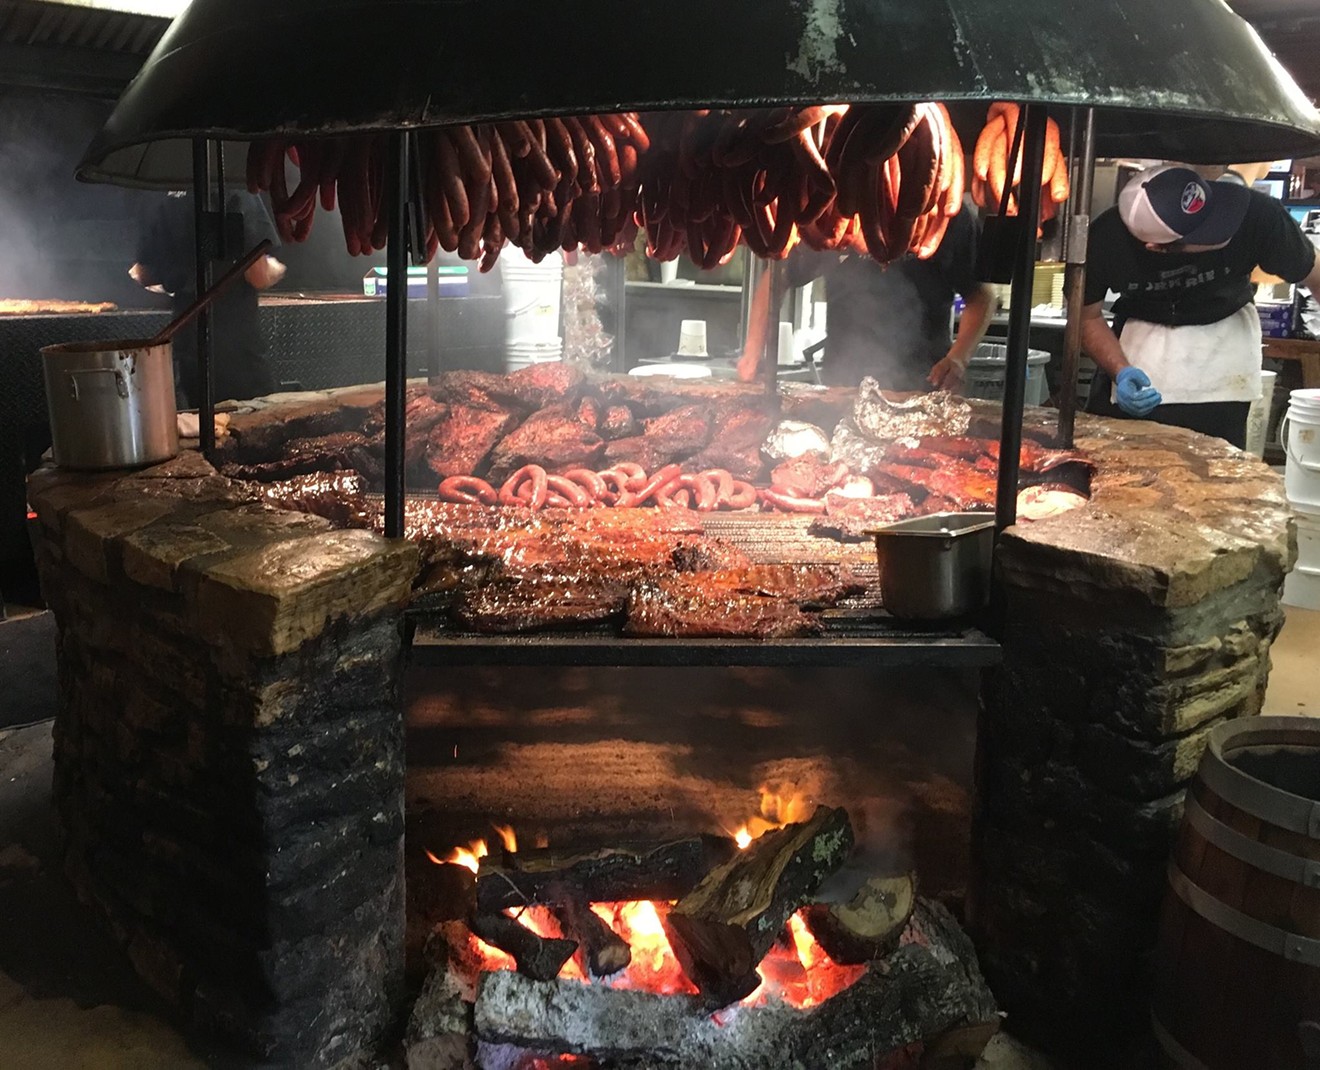 In Texas barbecue, the Salt Lick's pit is Beyonce-level famous.